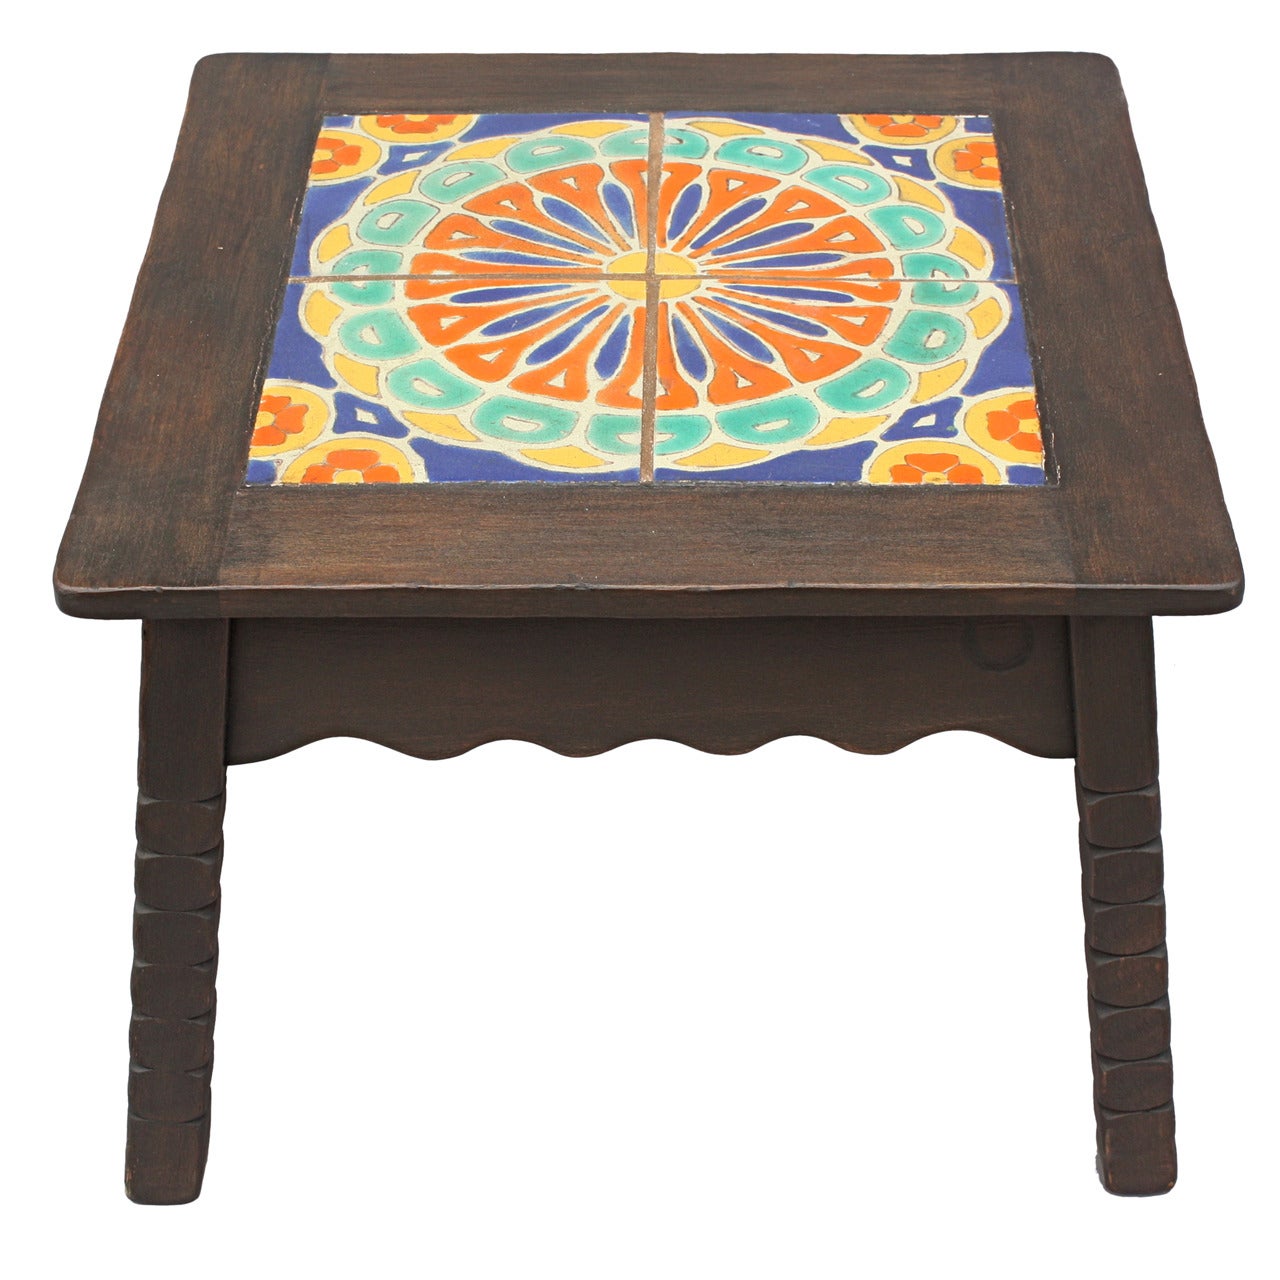 Signed Monterey Tiled Table